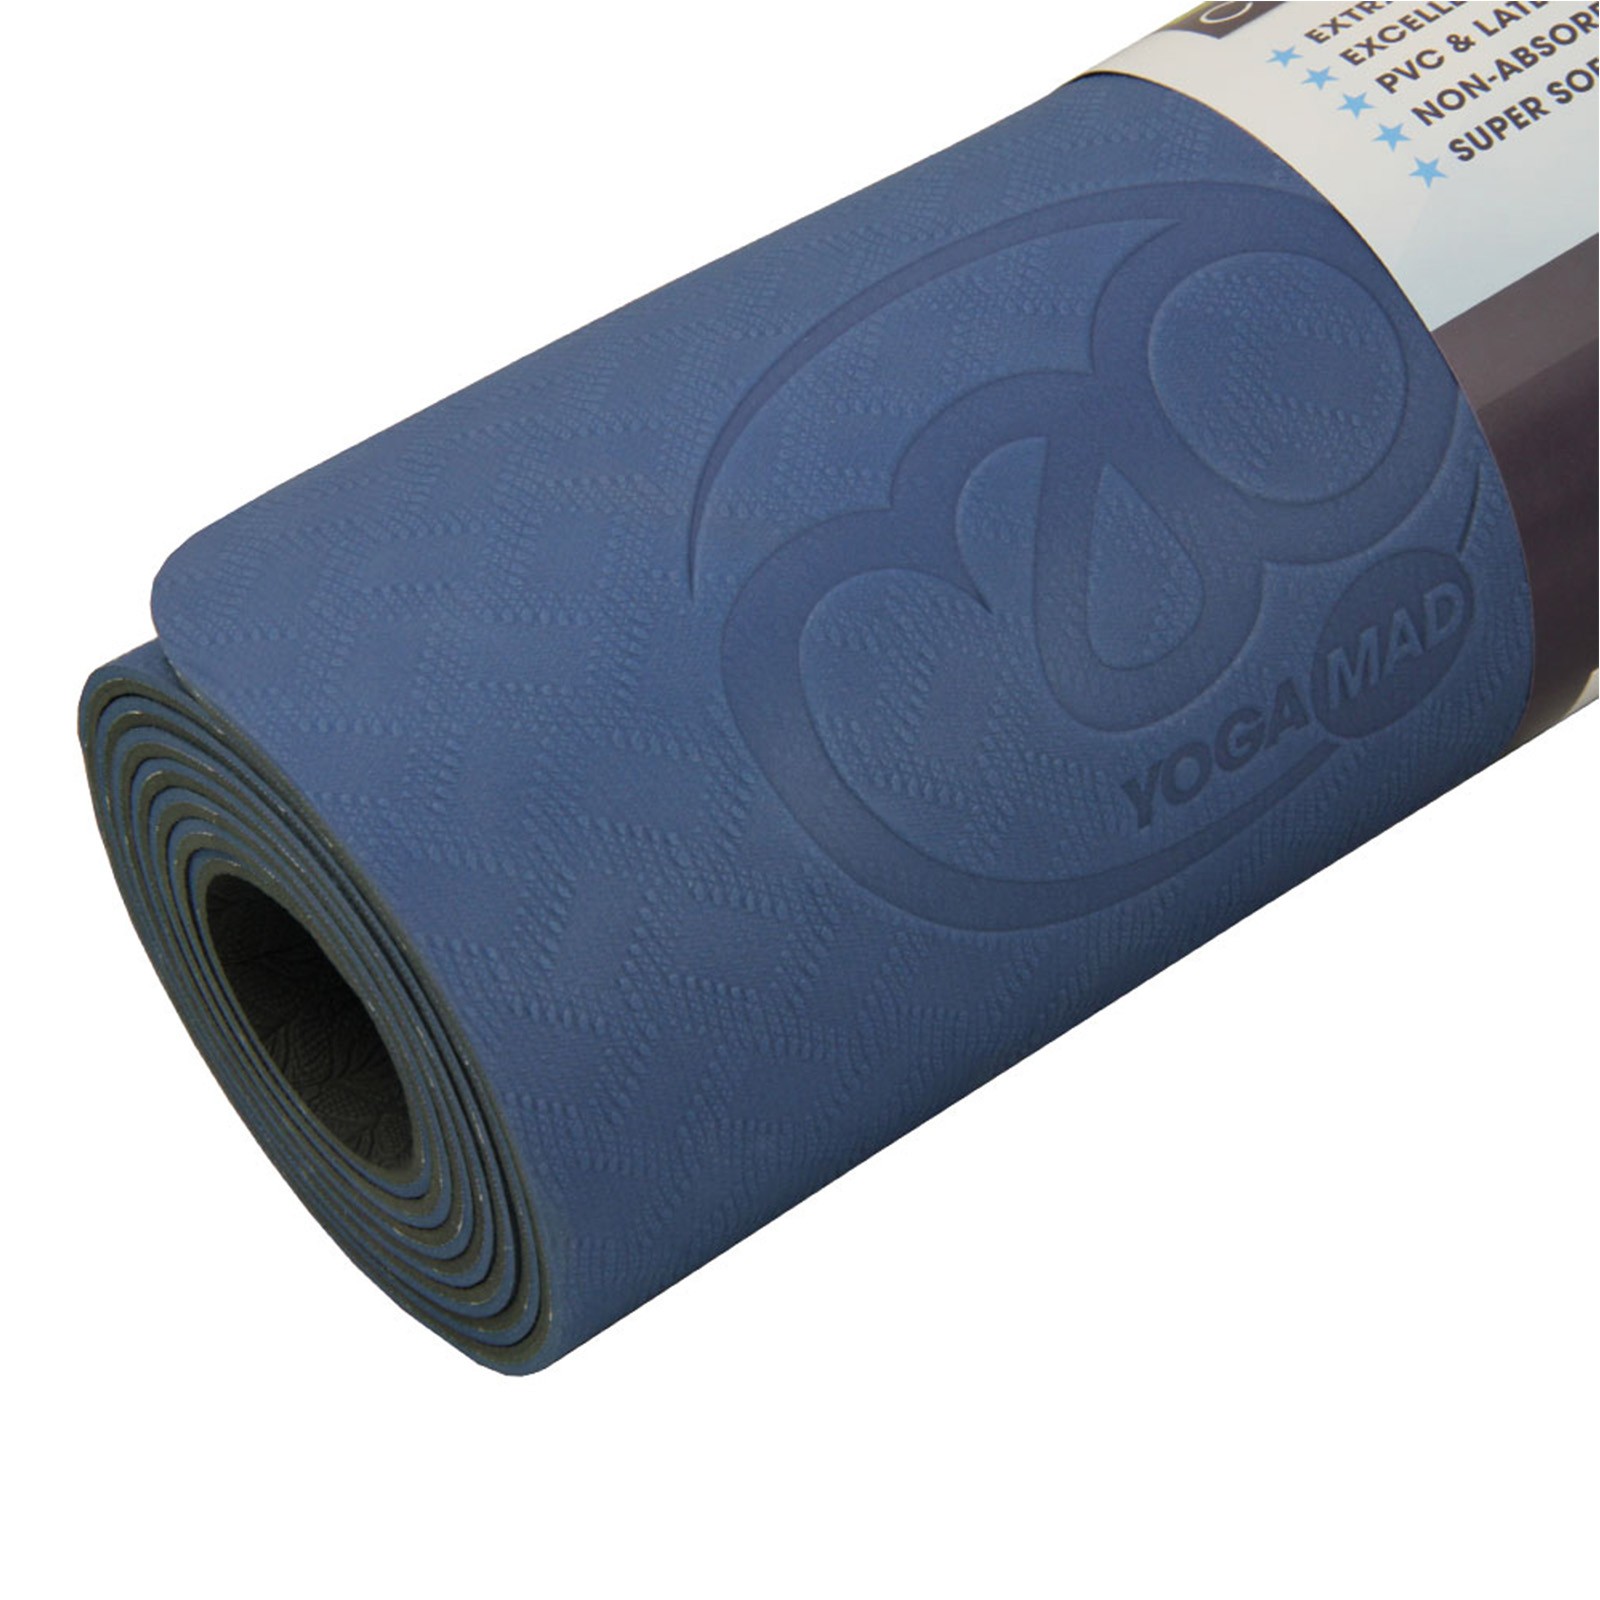 Yoga-Mad Evolution Yoga Mat with Carry String – Shop Online